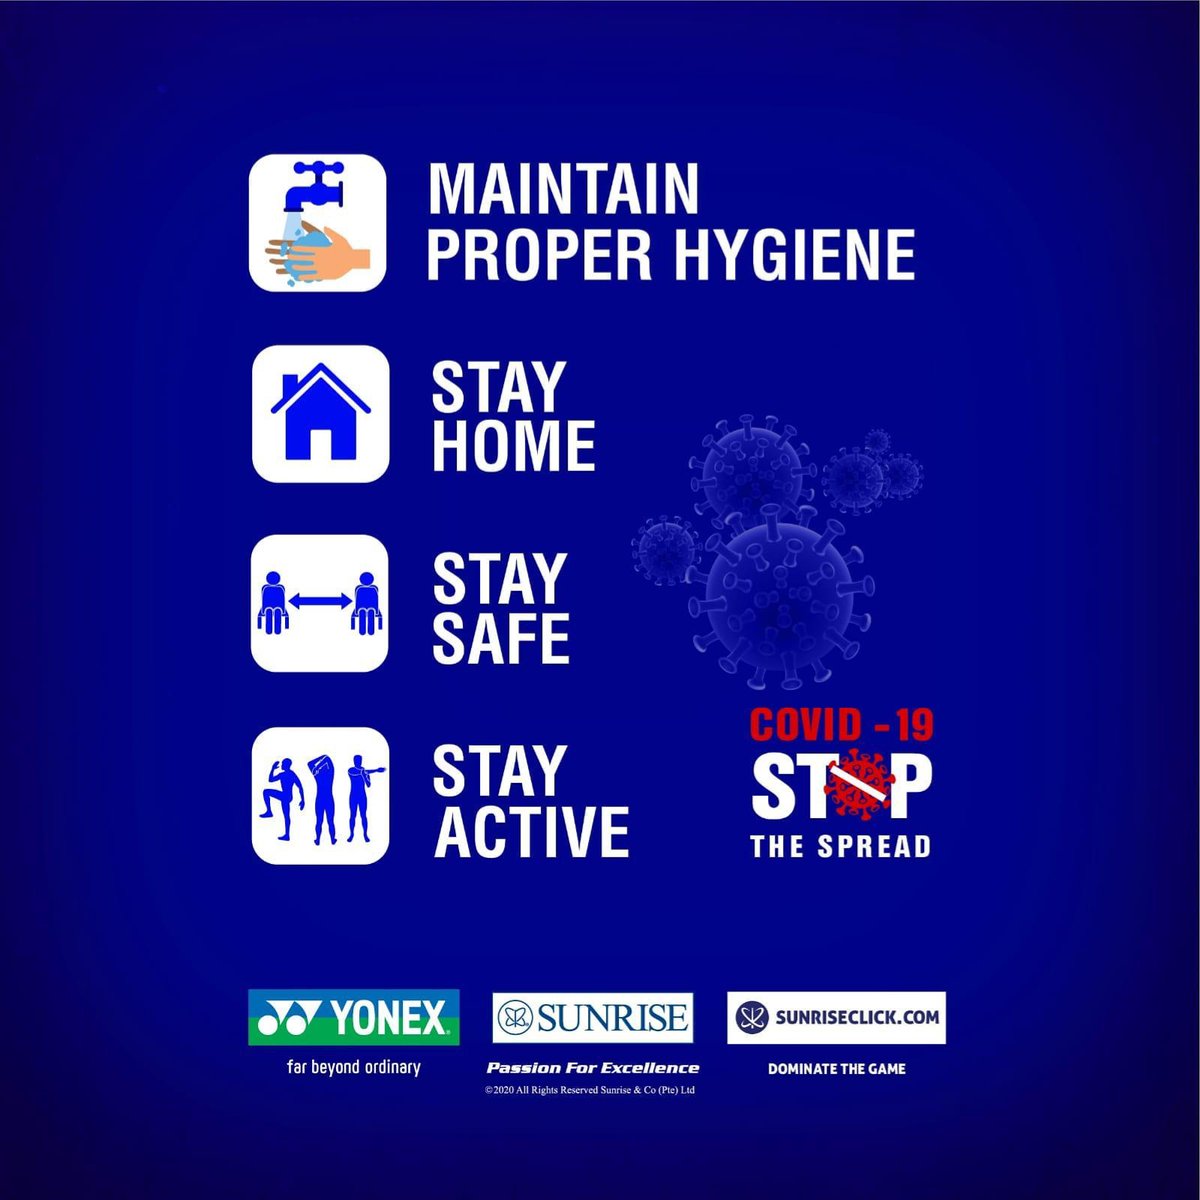 Stay Hygiene, Stay Home, Stay Safe and Stay Active!! #COVID19 #StopTheSpread #Yonex #Sunrise #SportMagnet